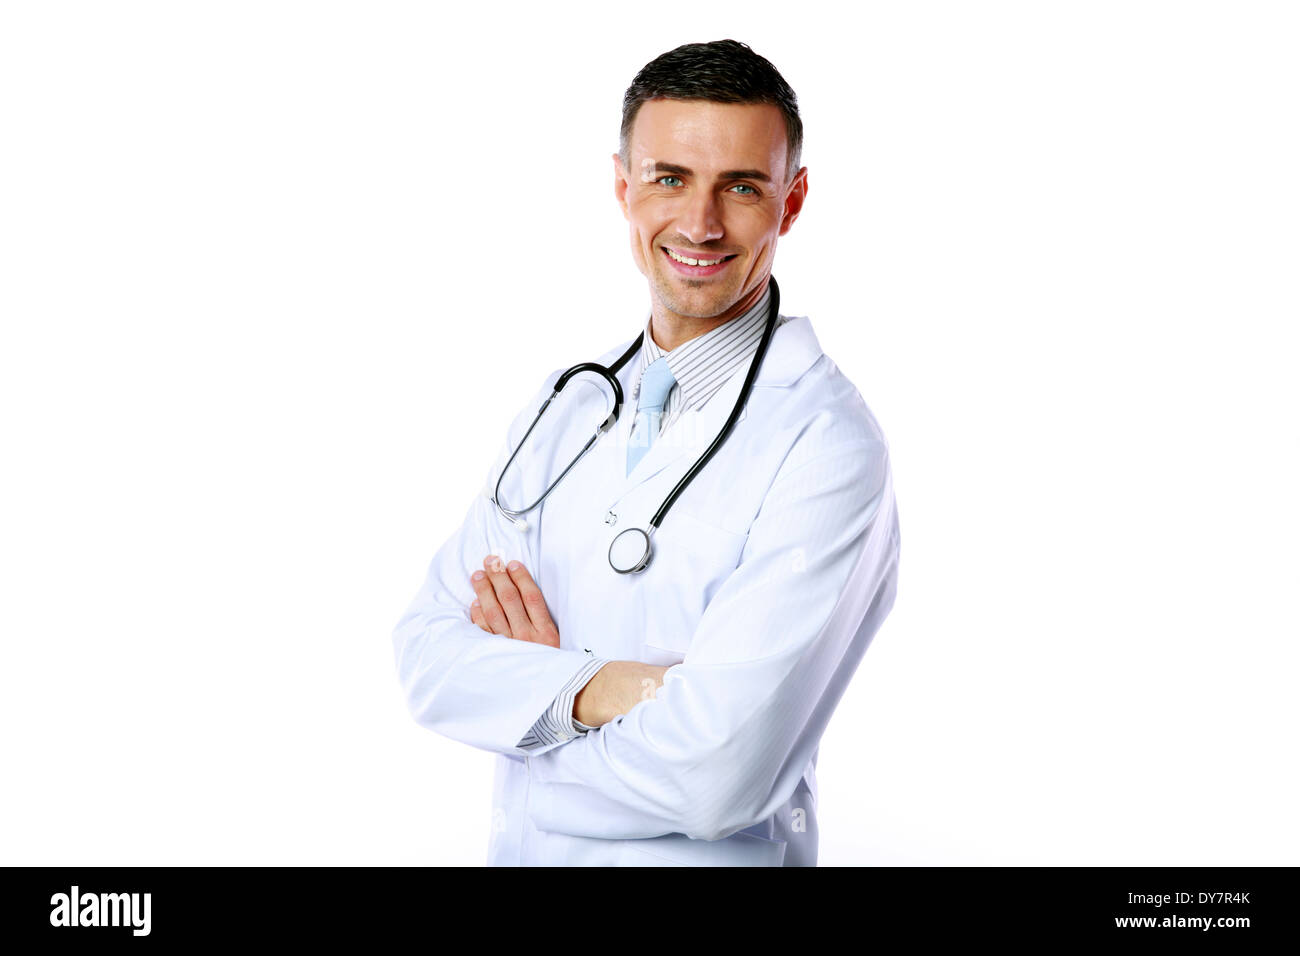 Portrait of a smiling male doctor with arms folded over white background Stock Photo